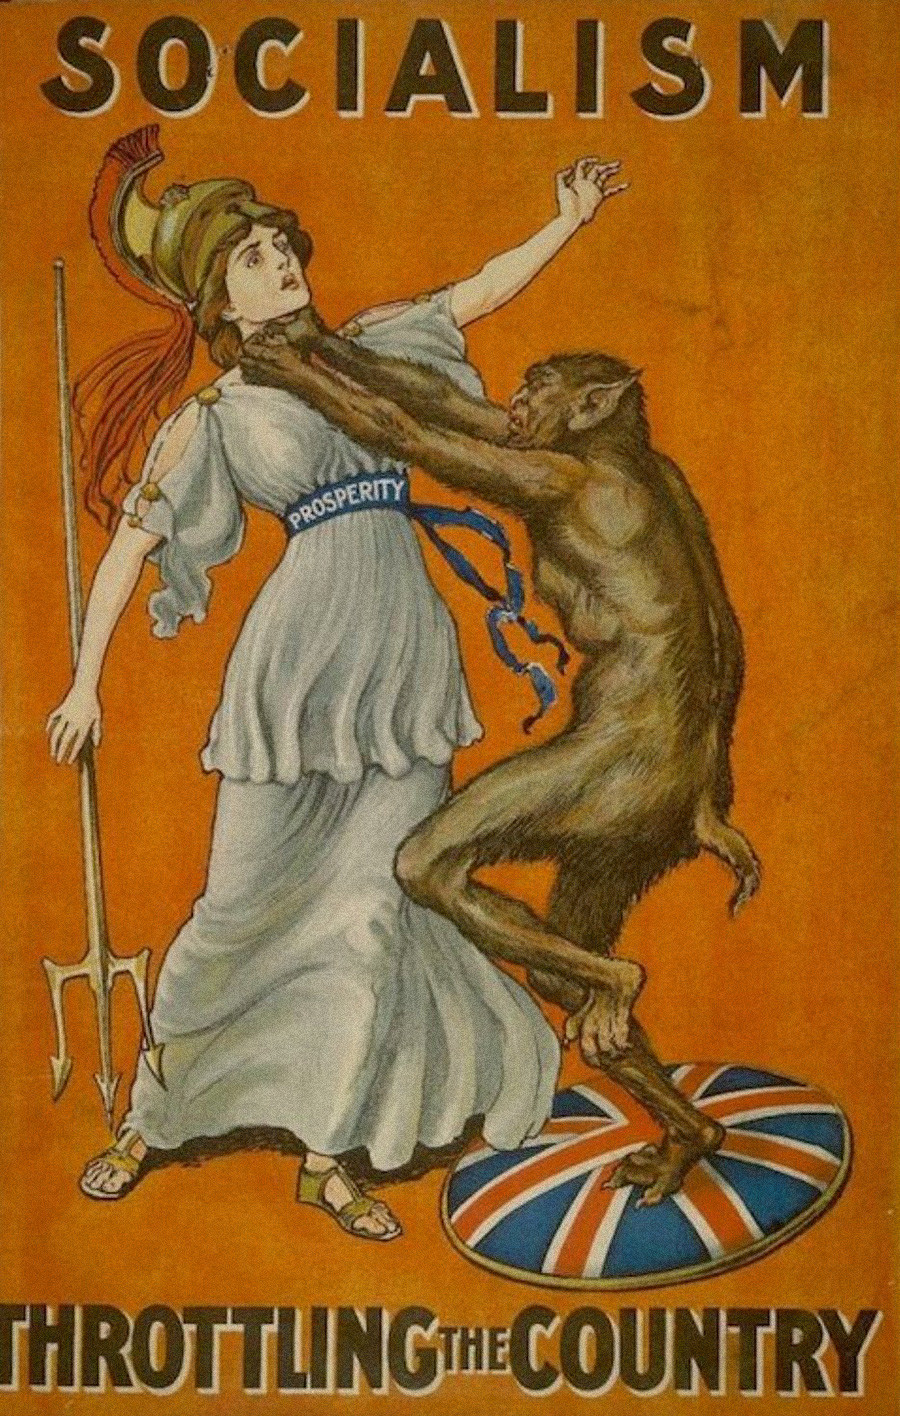 This poster was commissioned by the Conservative Party in Britain in 1909.